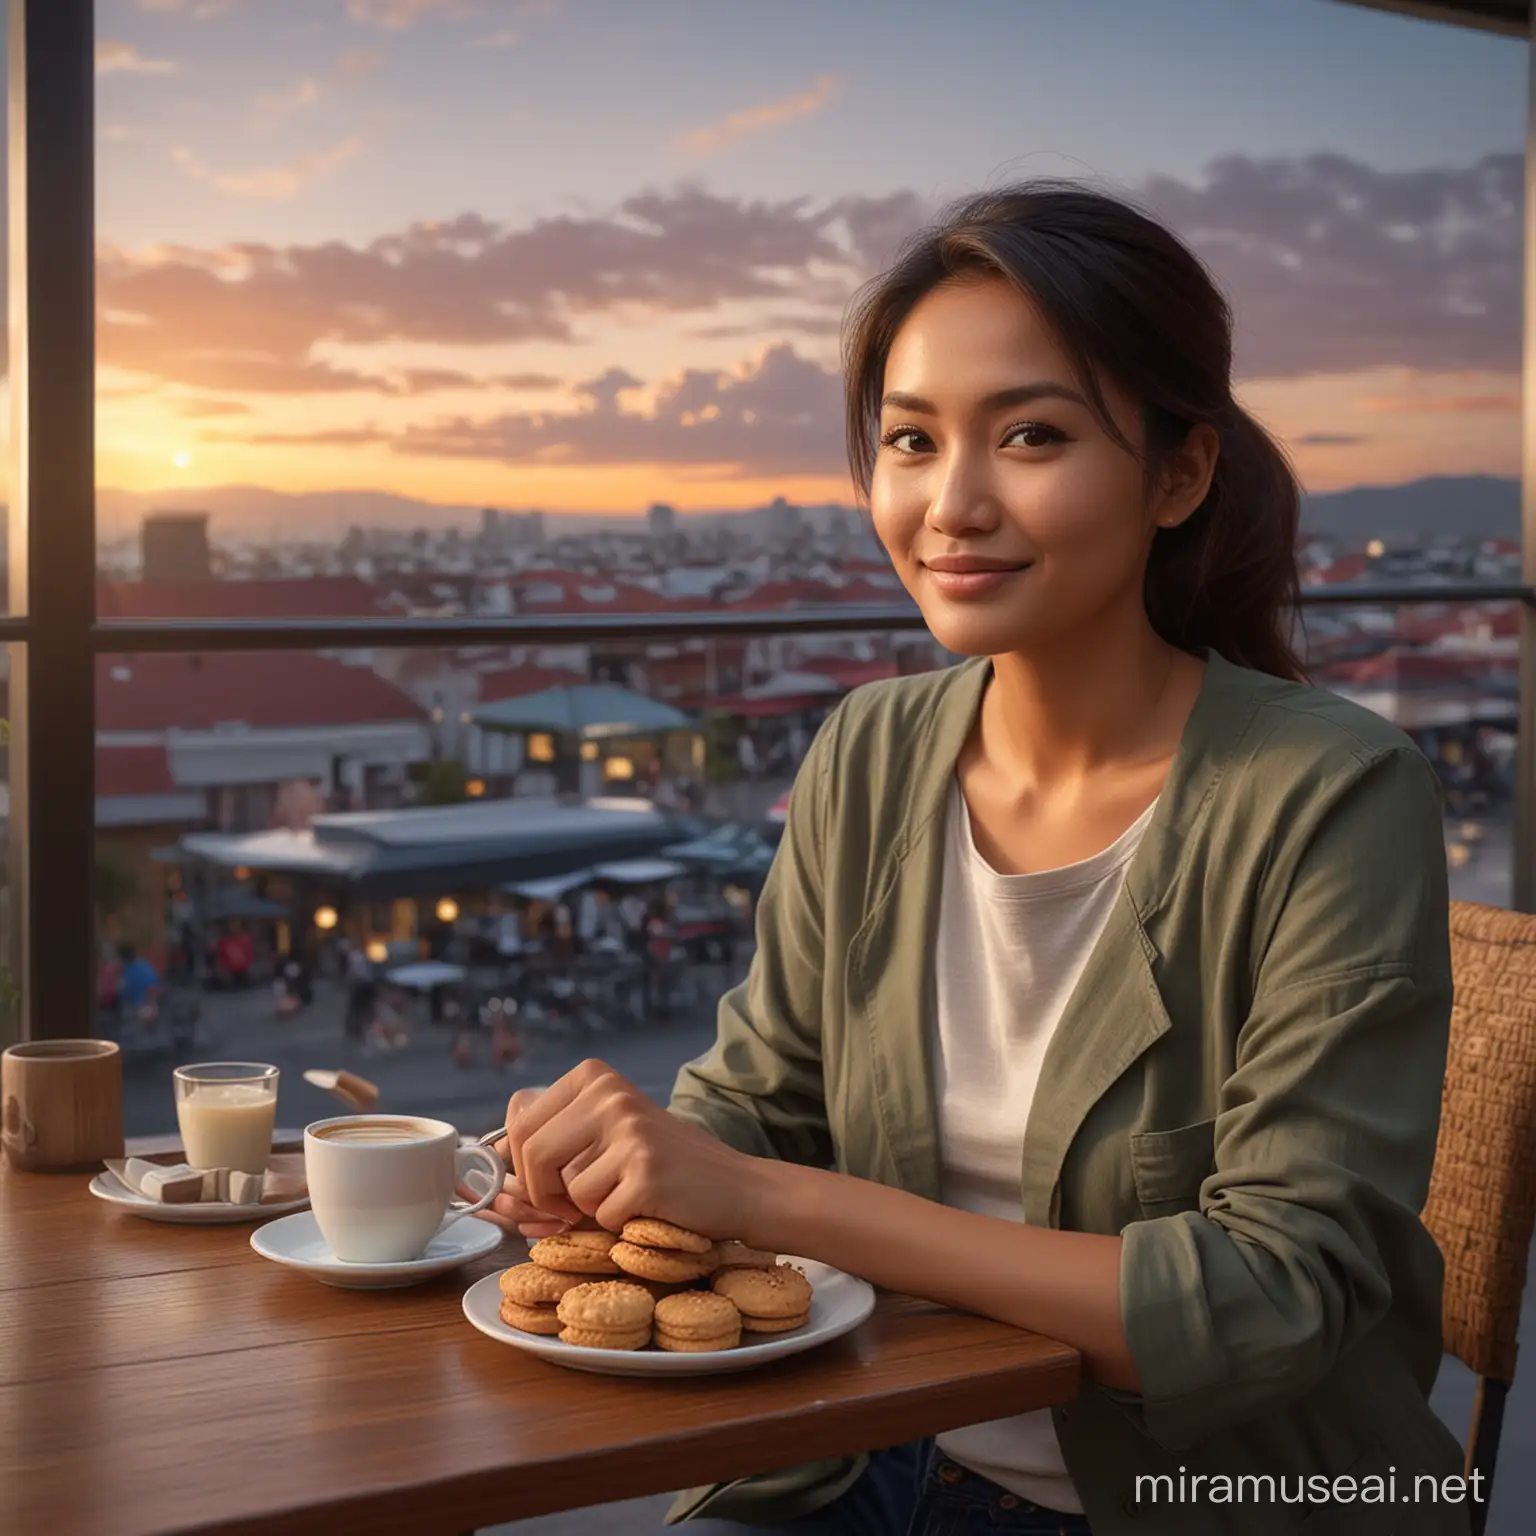 Create a photo-realistic image of a 30-something-year-old, good-looking Indonesian woman sitting alone in a cafe chair. In front of her is a cup of coffee and a small plate of cookies. The location is a cafe with a view of the sunset in the afternoon.